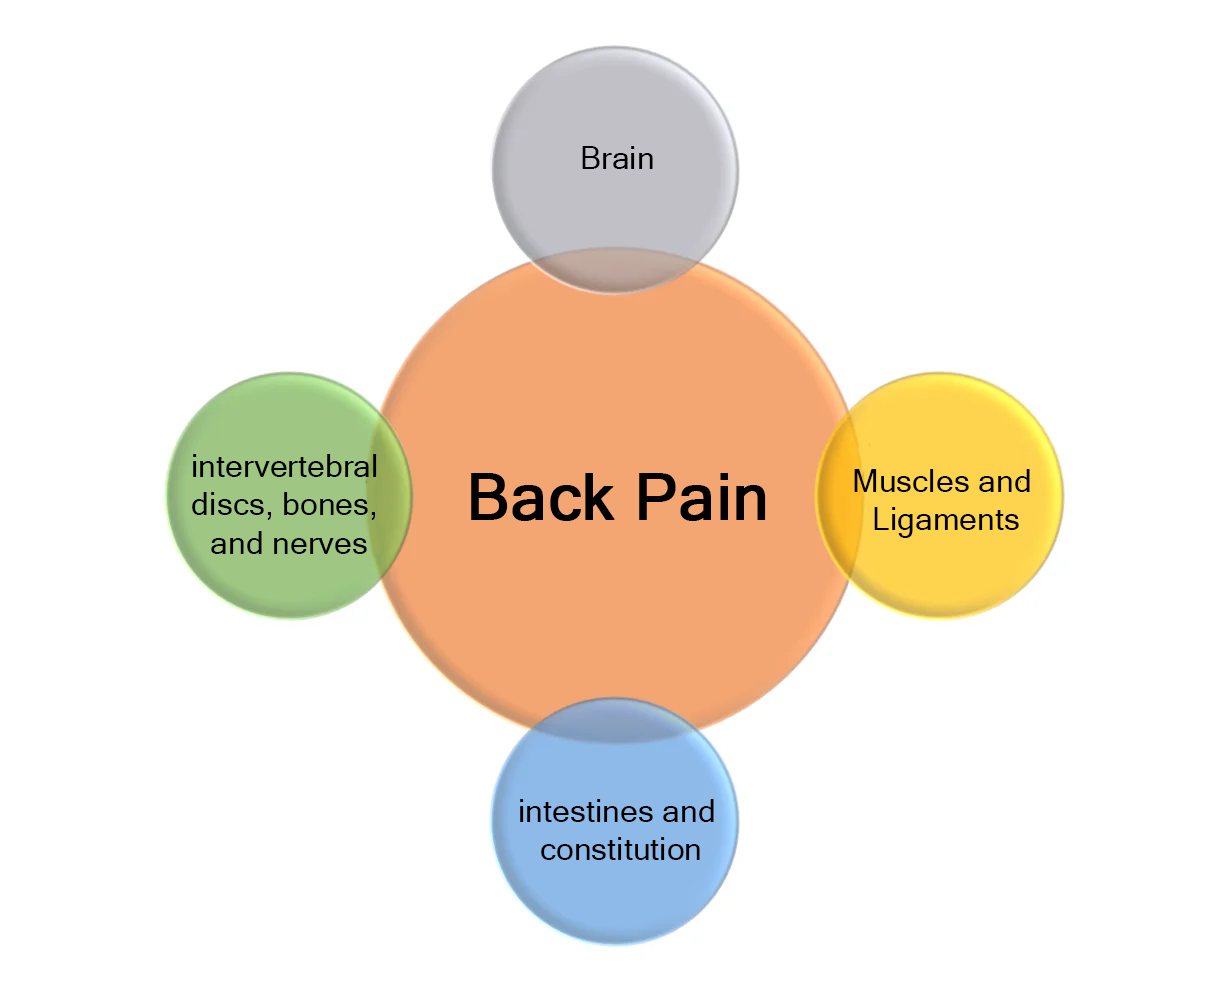 Lower back pain, performance, intervertebral discs, bones, nerves, intestines and constitution, muscles and ligaments